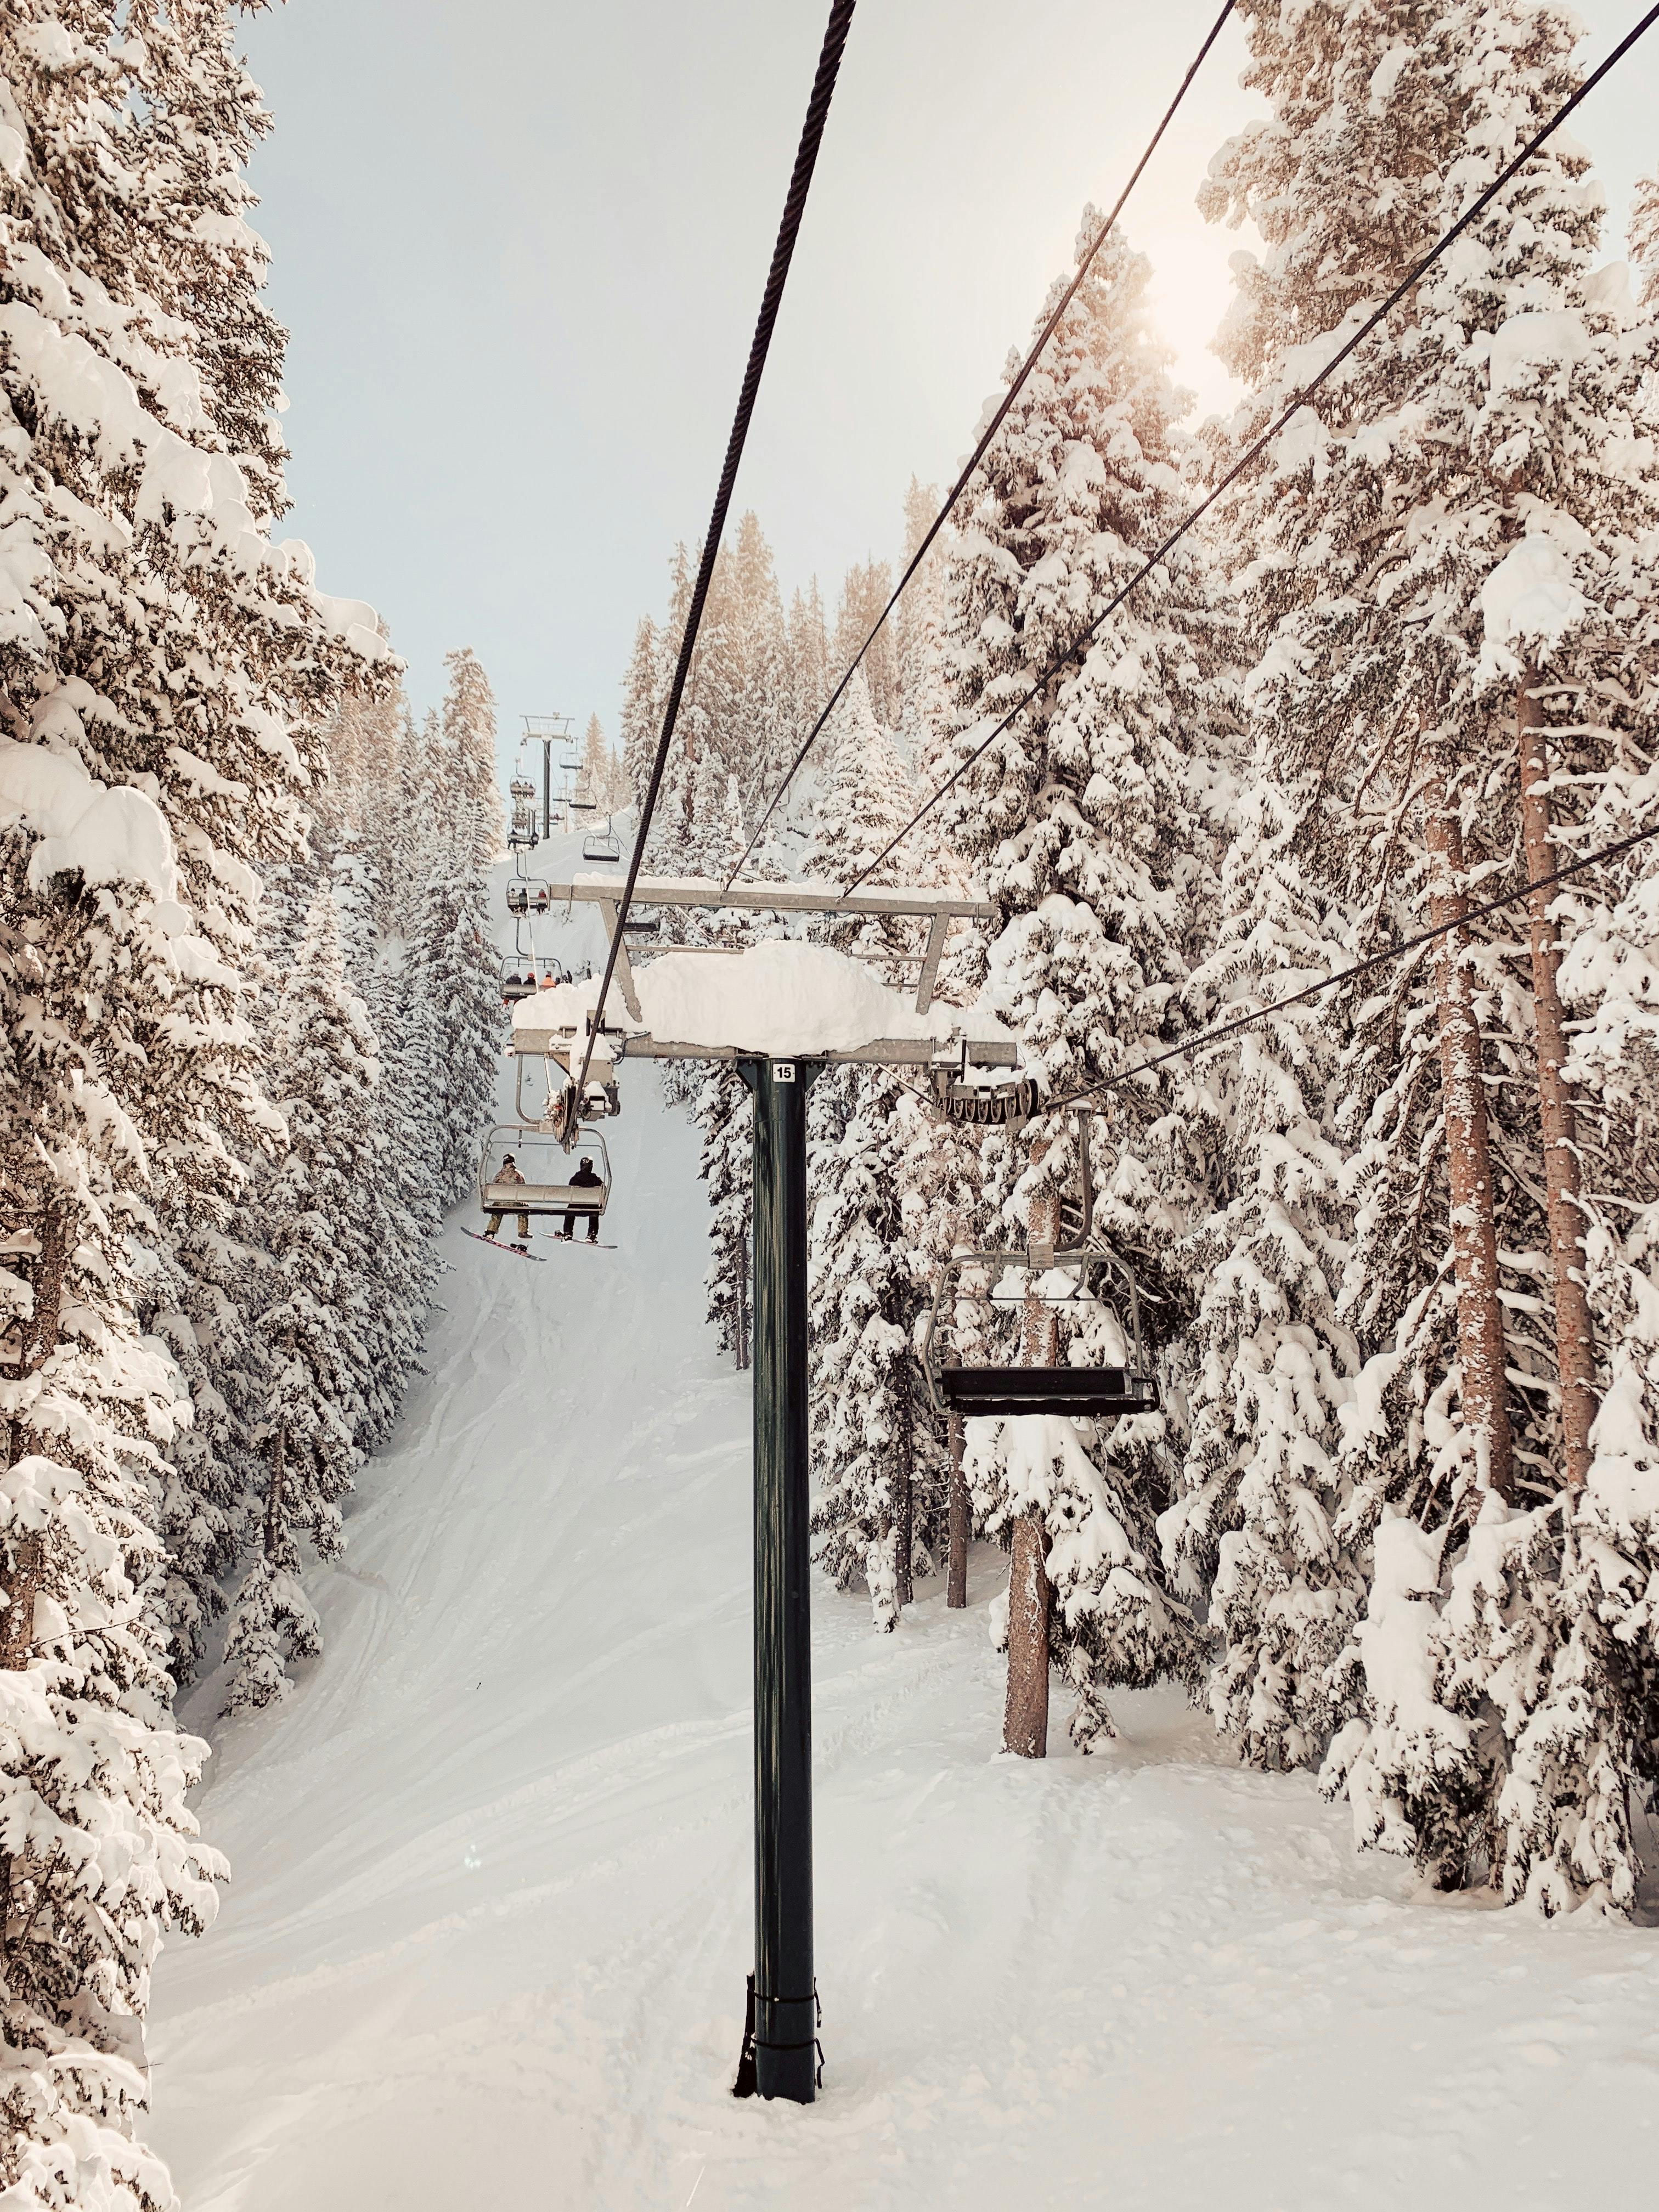 A chairlift works its way up the hill between snowy trees